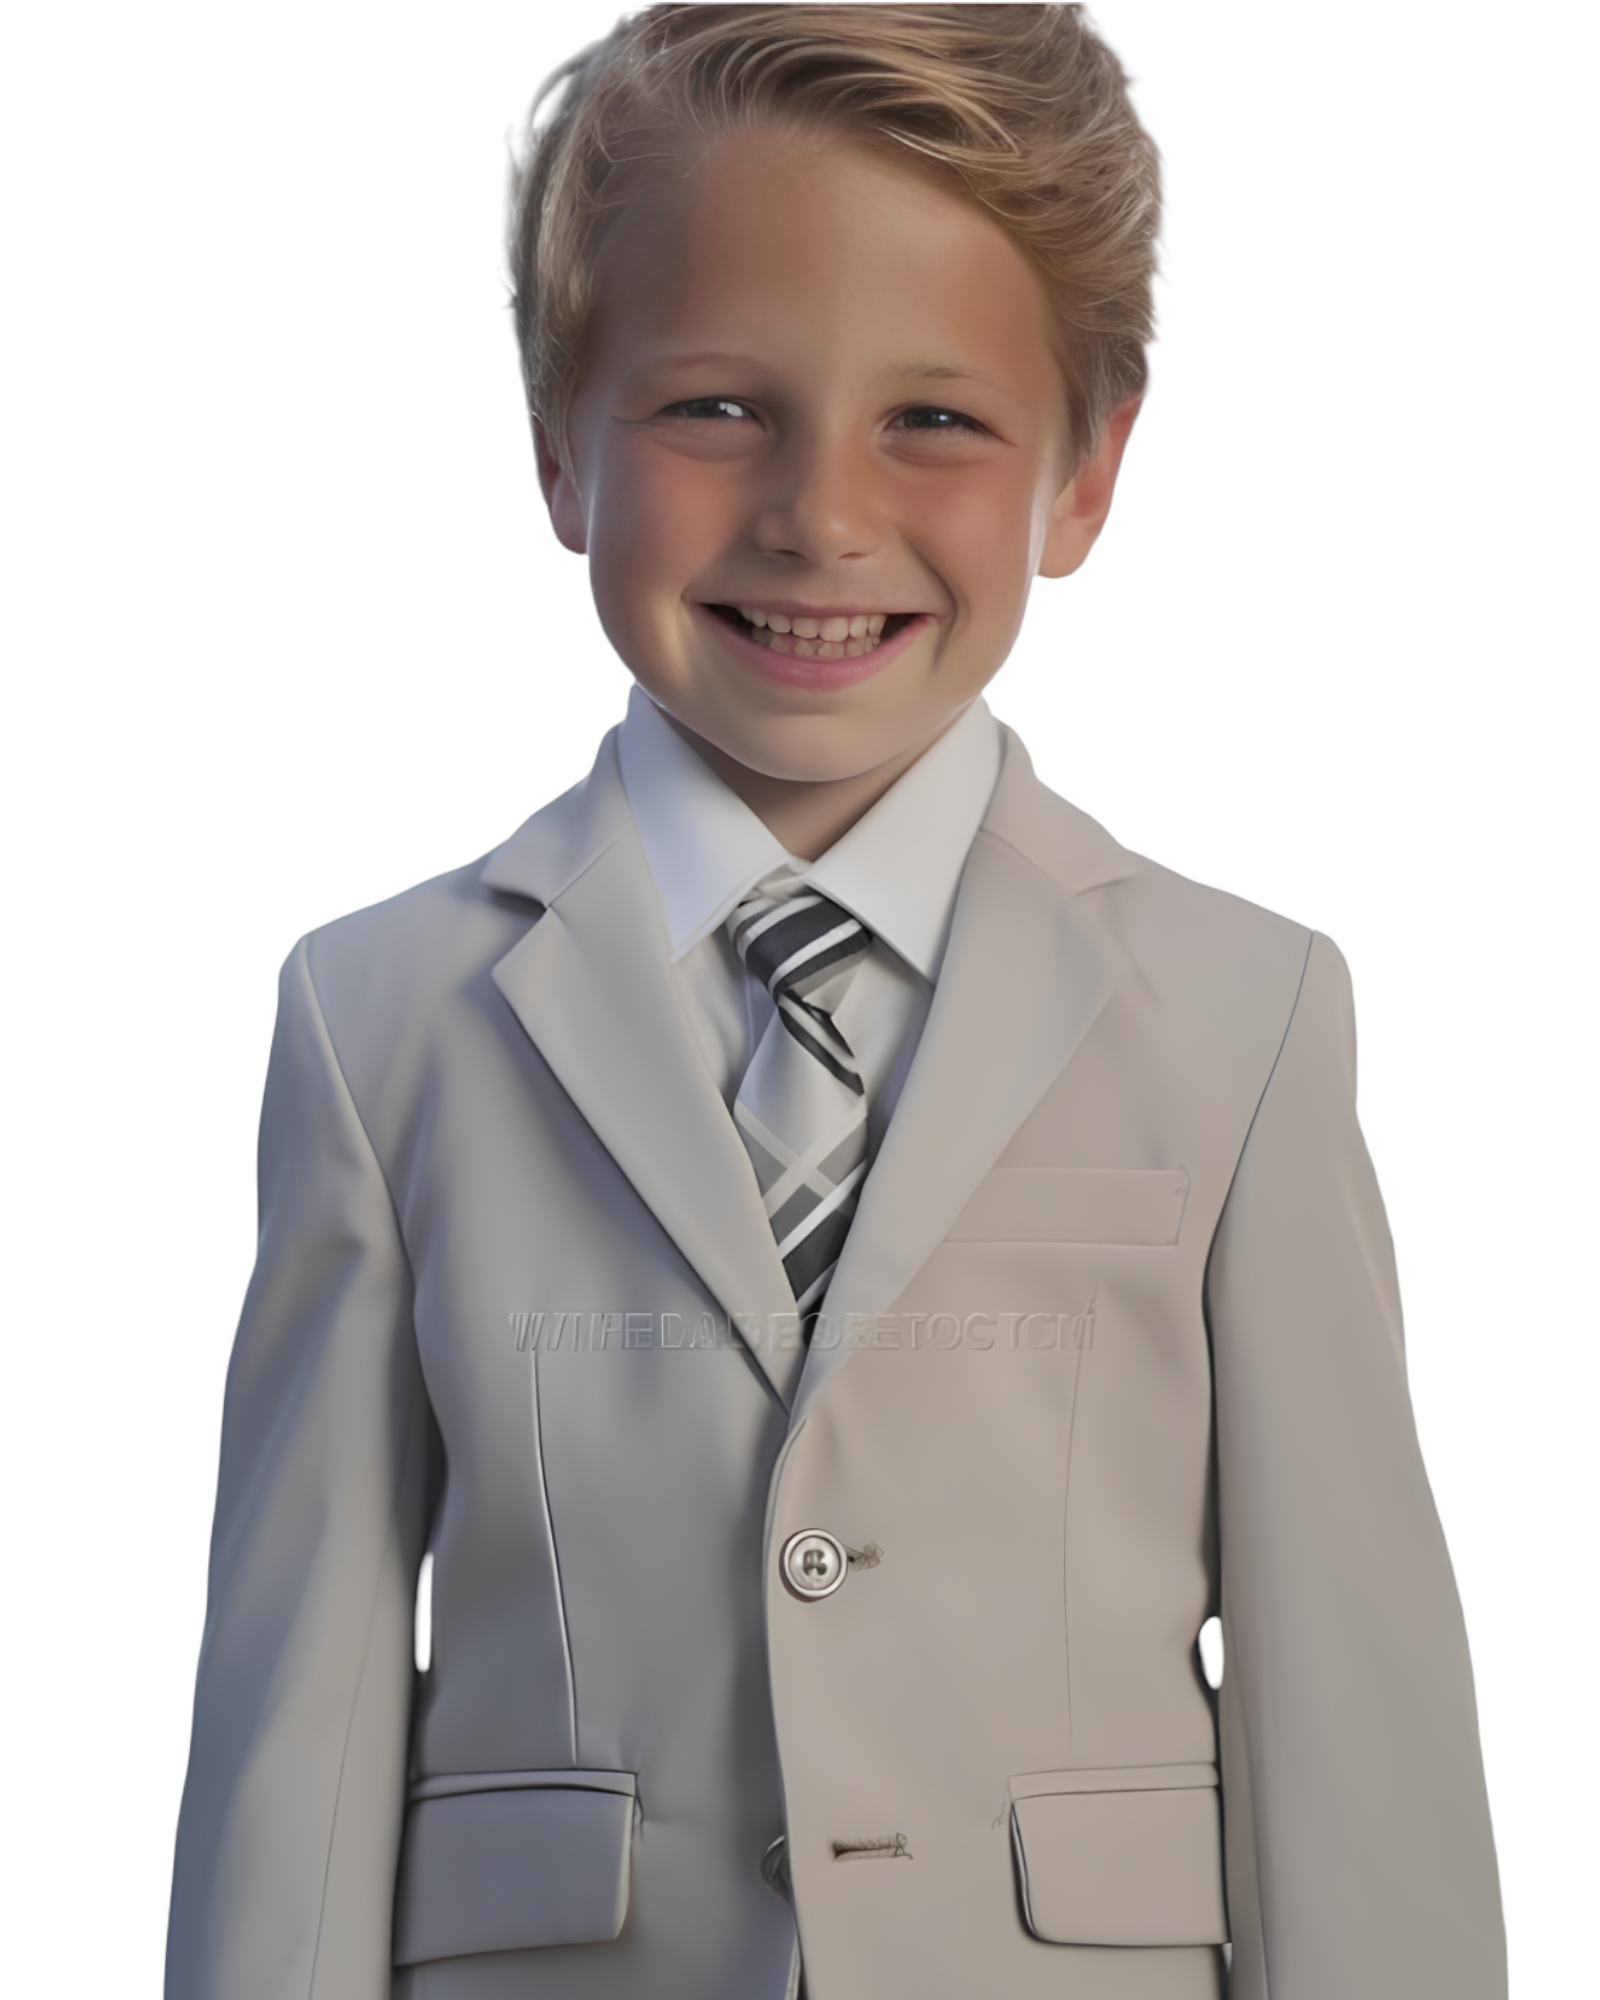 Young elegance personified in the (18) Executive light grey suit.